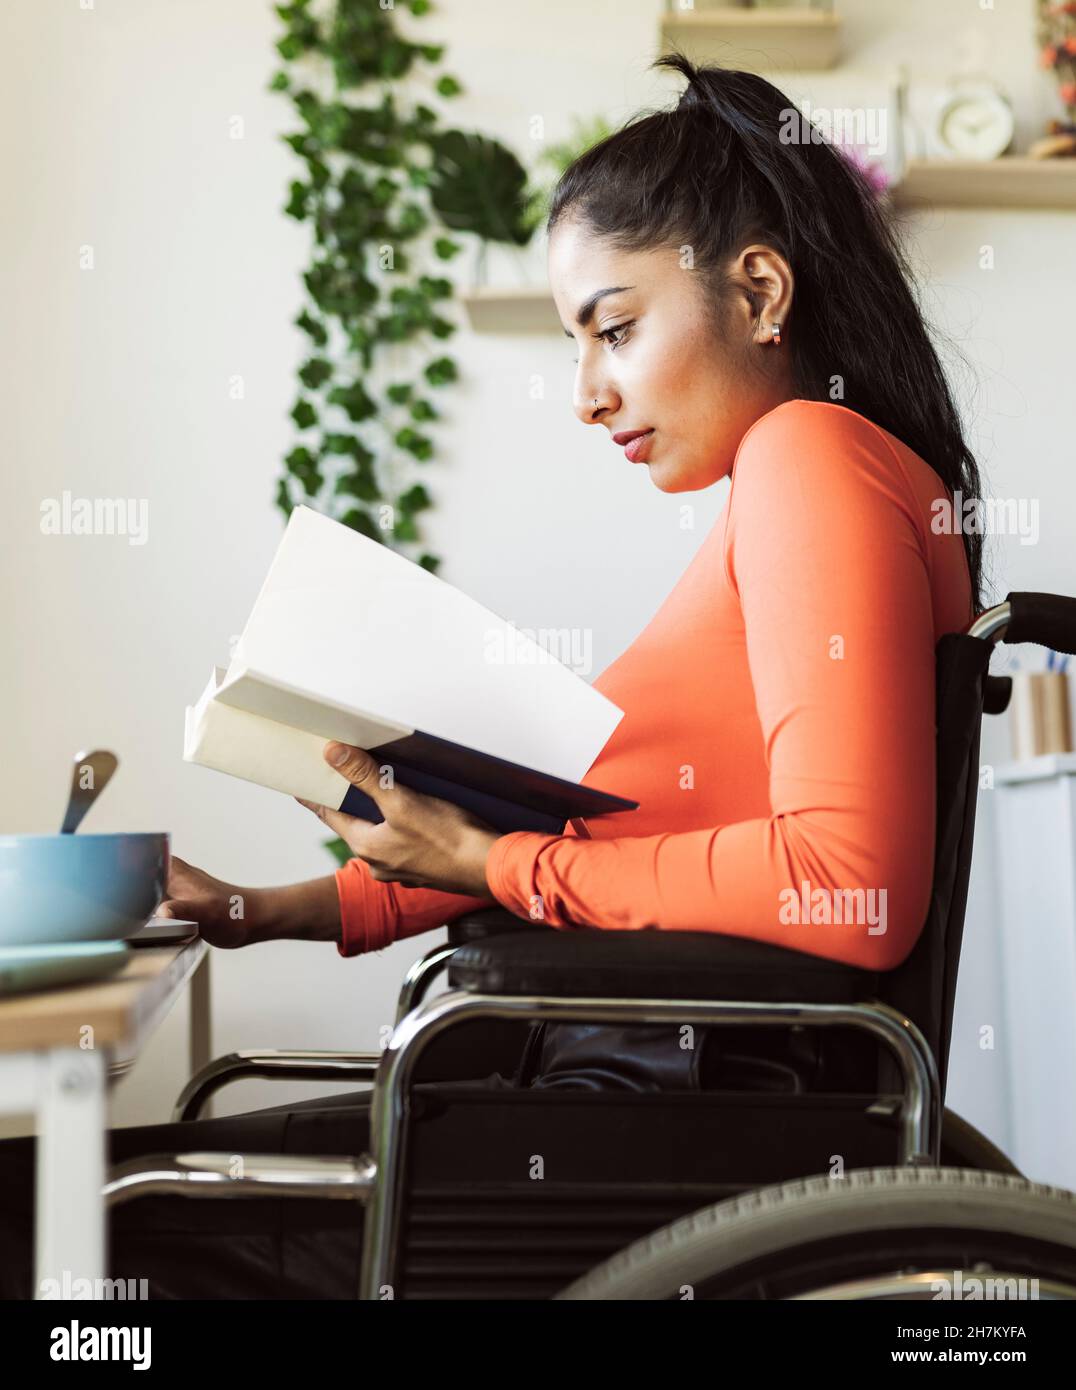 Smiling disable woman with food using laptop at home Stock Photo